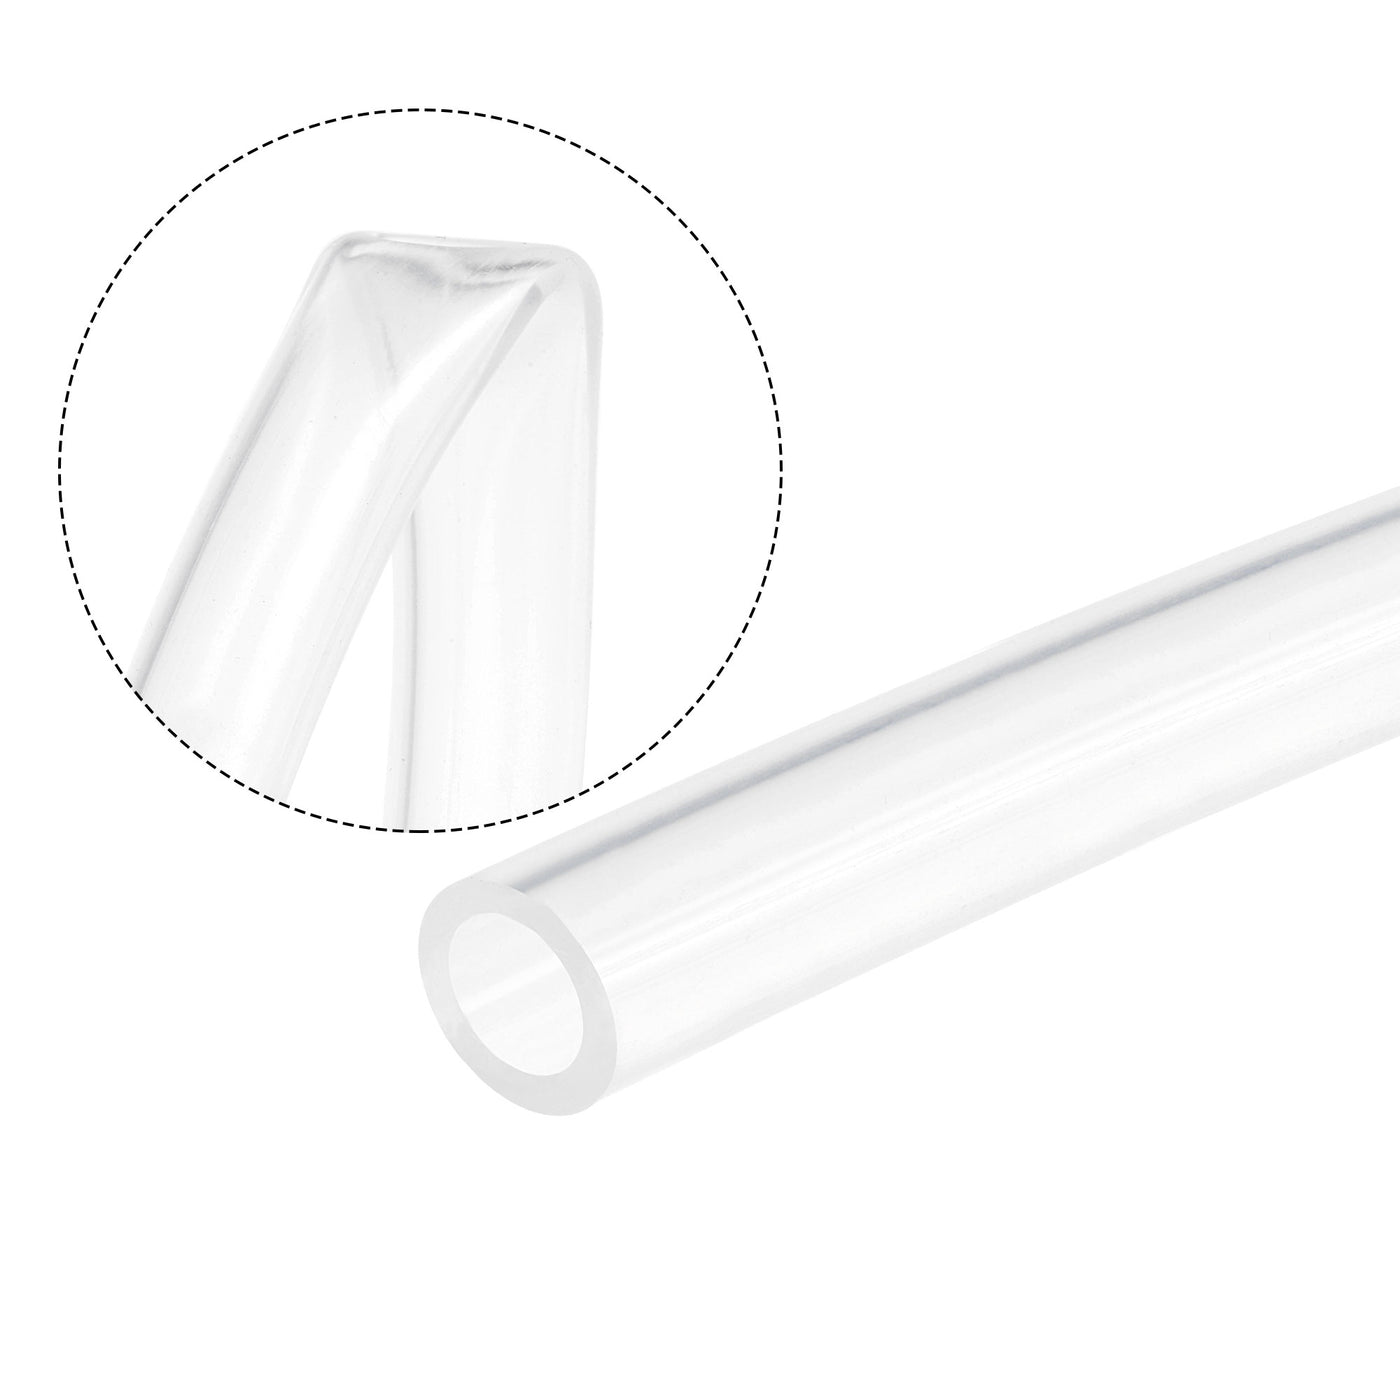 uxcell Uxcell Clear Silicone Tubing, 5/16"(8mm) ID 1/2"(12mm) OD 8ft, Flexible Silicone Tube for Air Water Pipe Pump Transfer